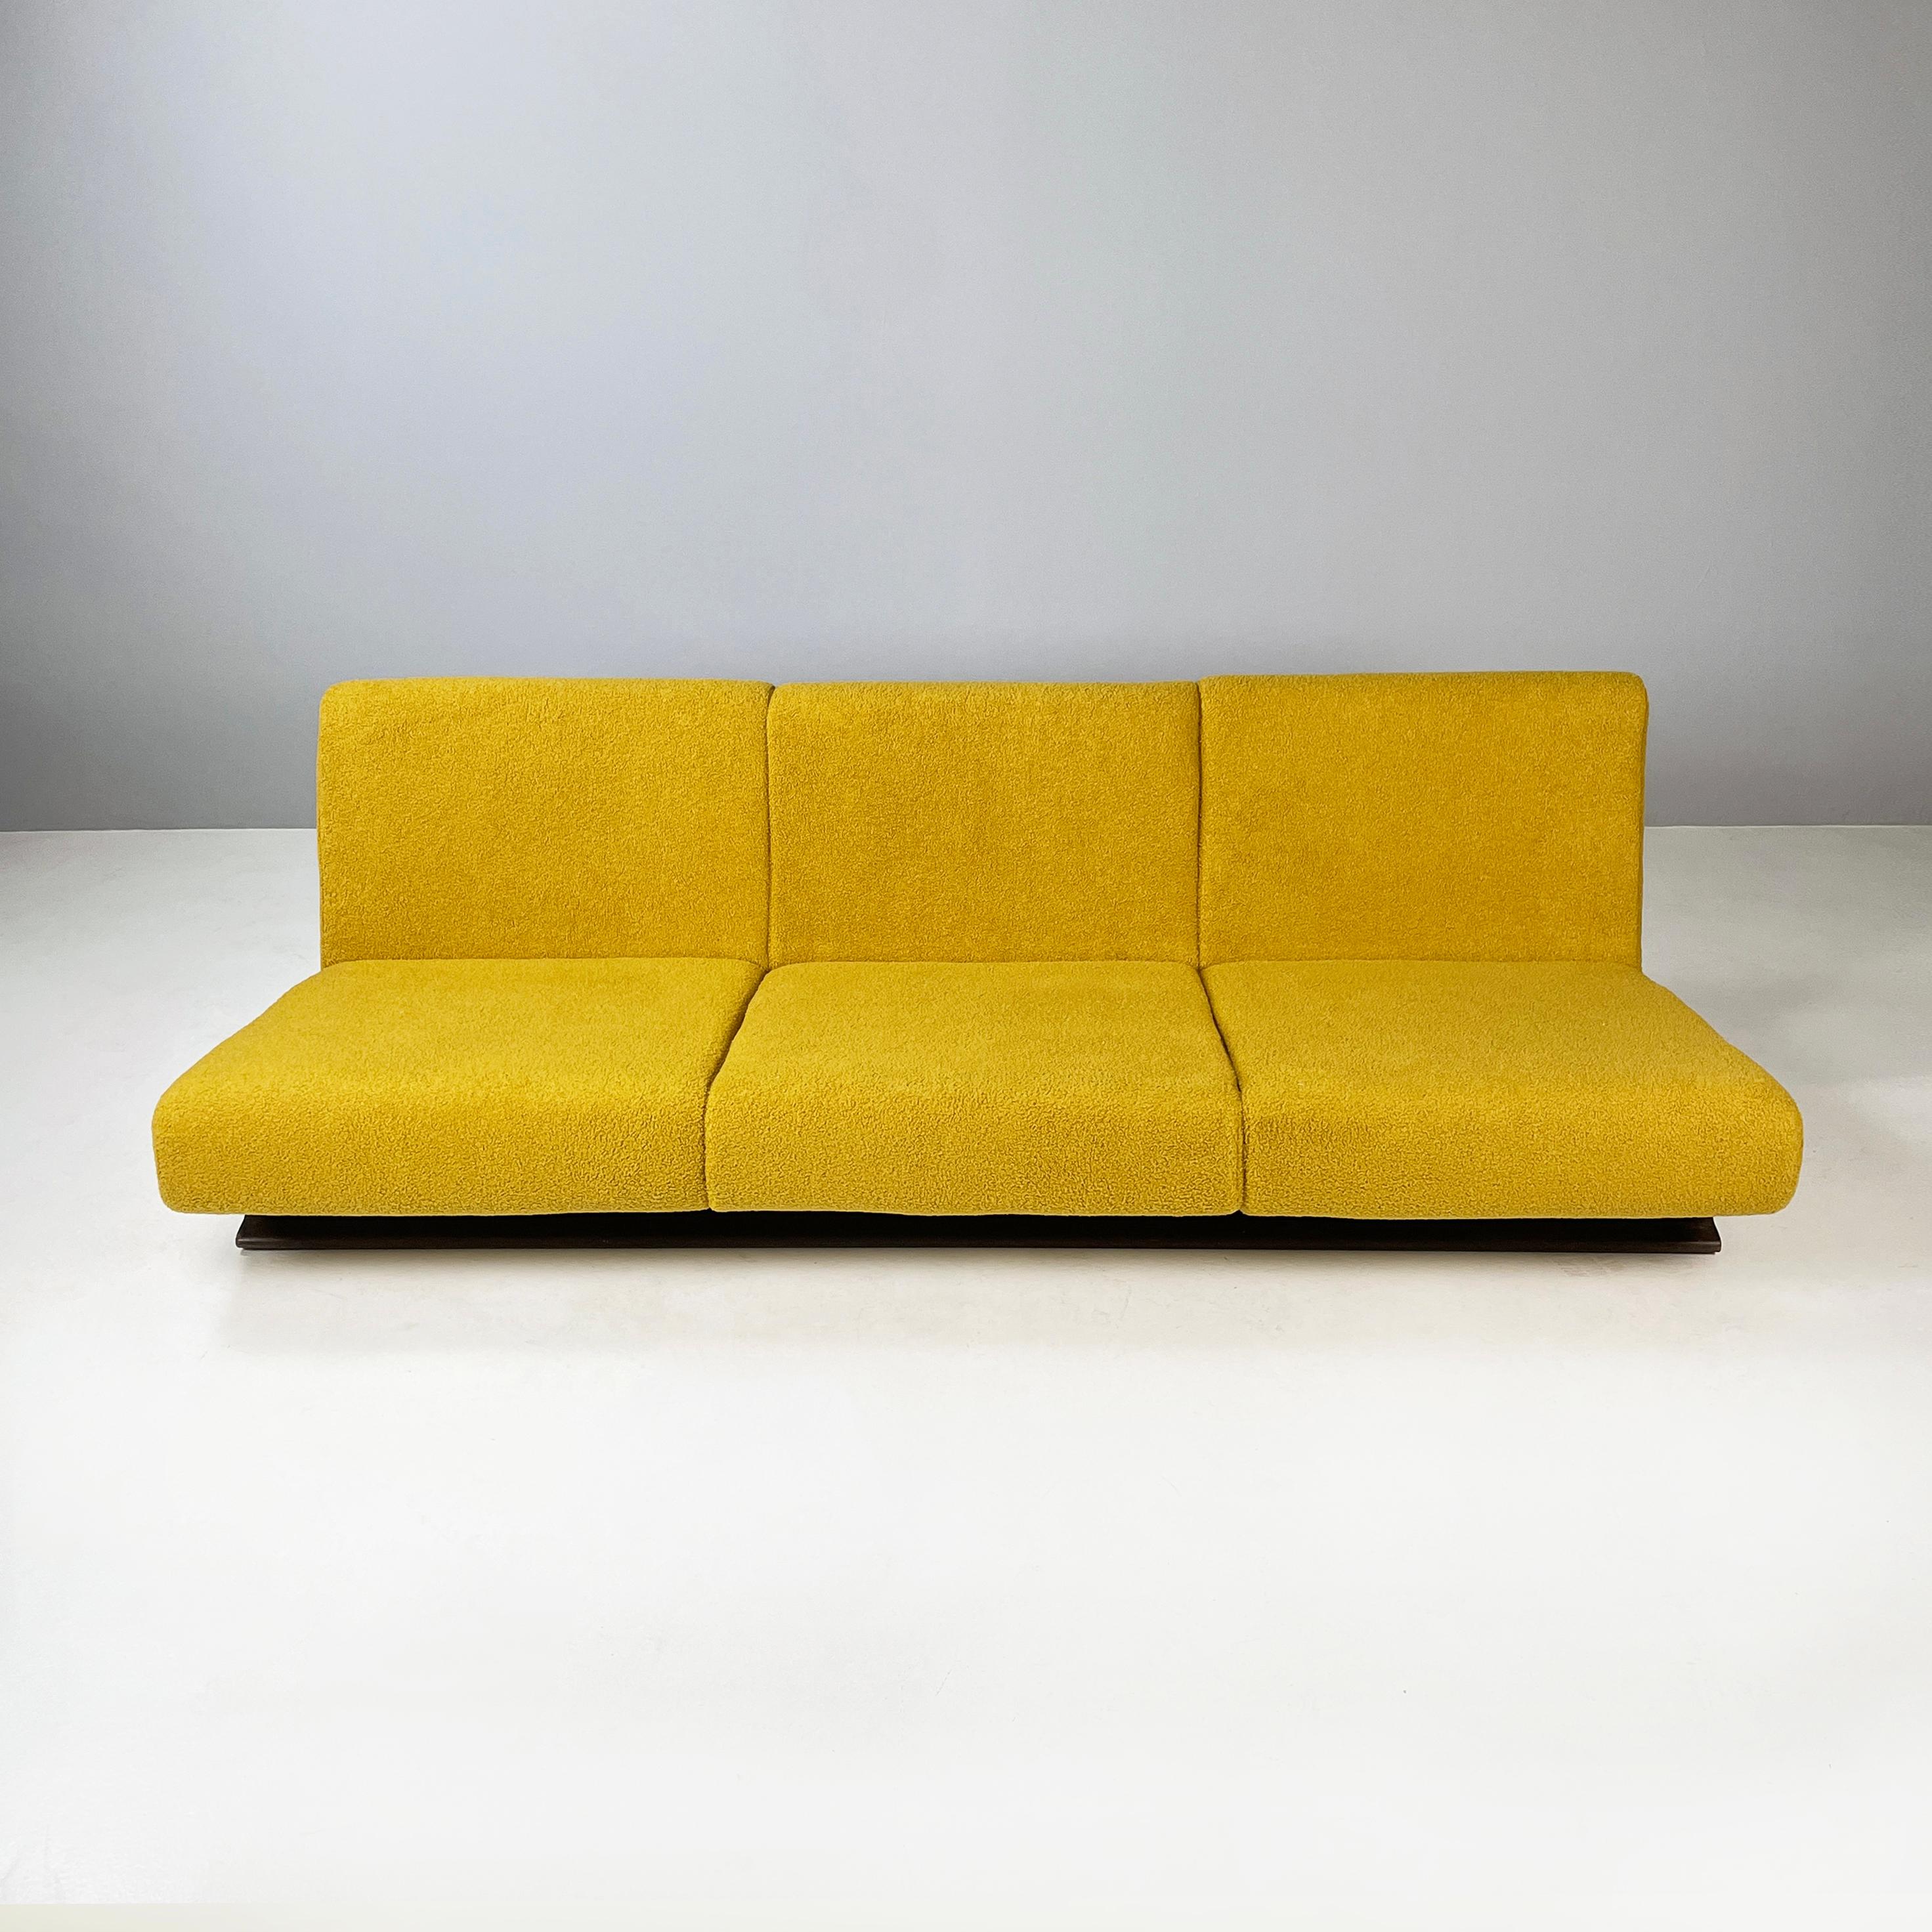 Italian space age Three-seater sofa in yellow fabric and black wood, 1970s
Three-seater sofa with squared seat and back, padded and covered in yellow teddy fabric. The legs are two strips made of black painted wood.
1970 approx.
Good condition, the